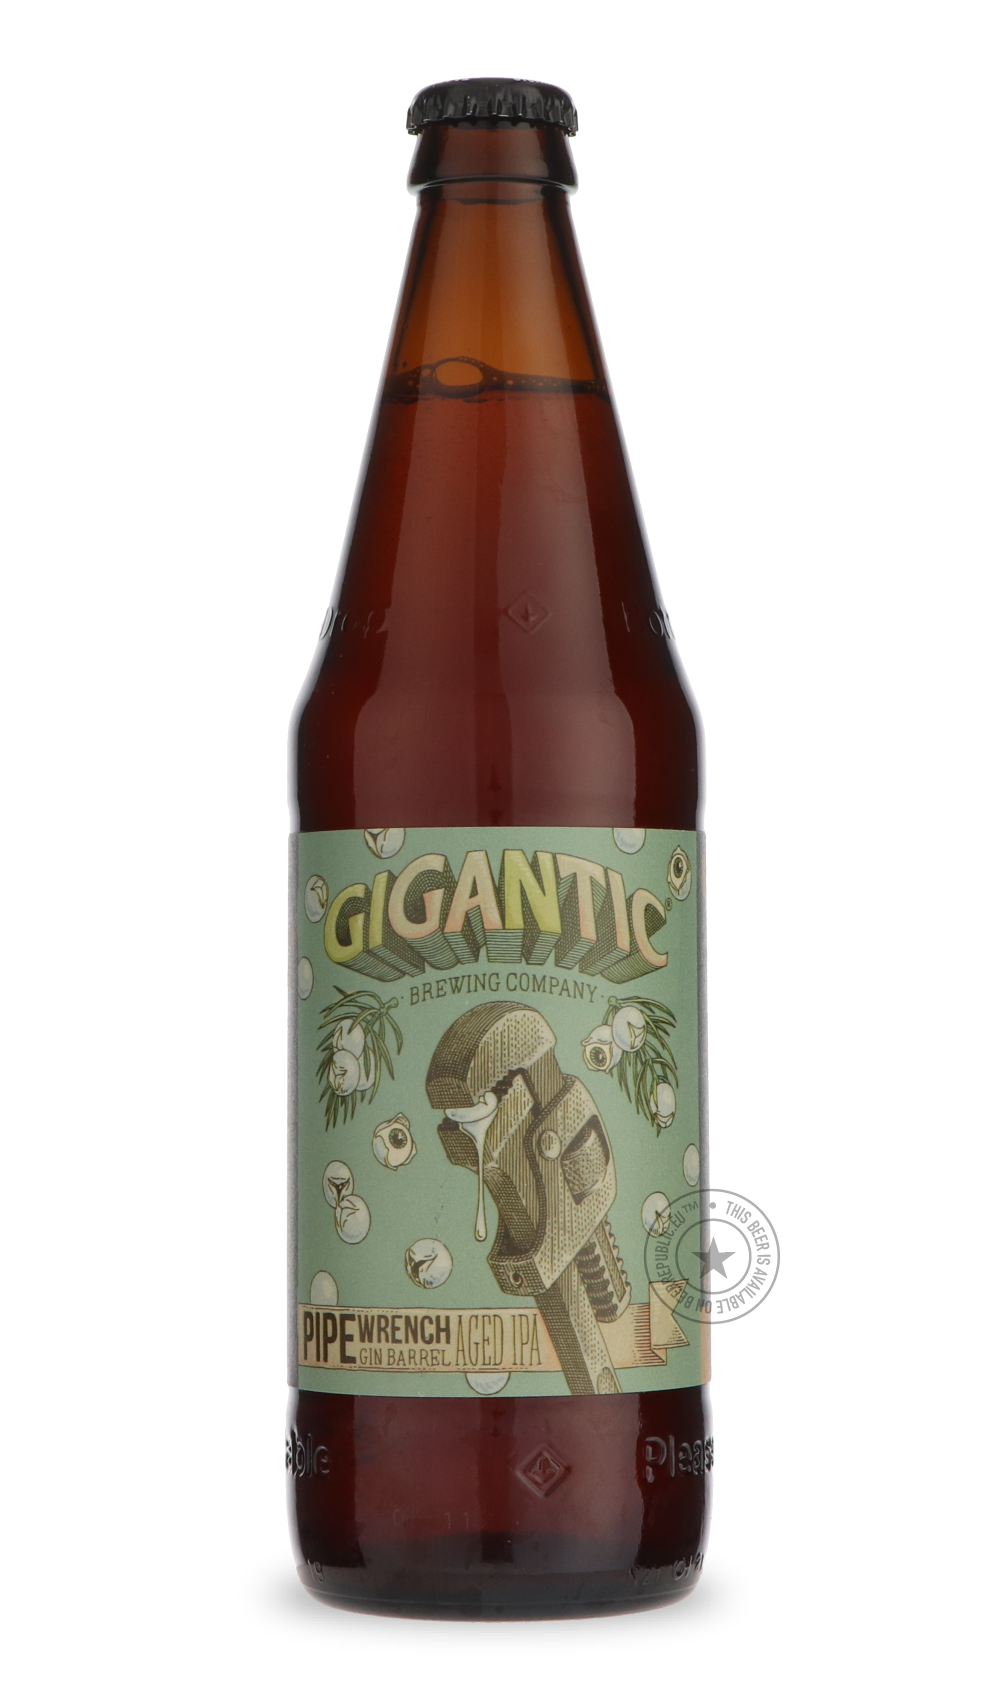 -Gigantic- Pipewrench-IPA- Only @ Beer Republic - The best online beer store for American & Canadian craft beer - Buy beer online from the USA and Canada - Bier online kopen - Amerikaans bier kopen - Craft beer store - Craft beer kopen - Amerikanisch bier kaufen - Bier online kaufen - Acheter biere online - IPA - Stout - Porter - New England IPA - Hazy IPA - Imperial Stout - Barrel Aged - Barrel Aged Imperial Stout - Brown - Dark beer - Blond - Blonde - Pilsner - Lager - Wheat - Weizen - Amber - Barley Wine